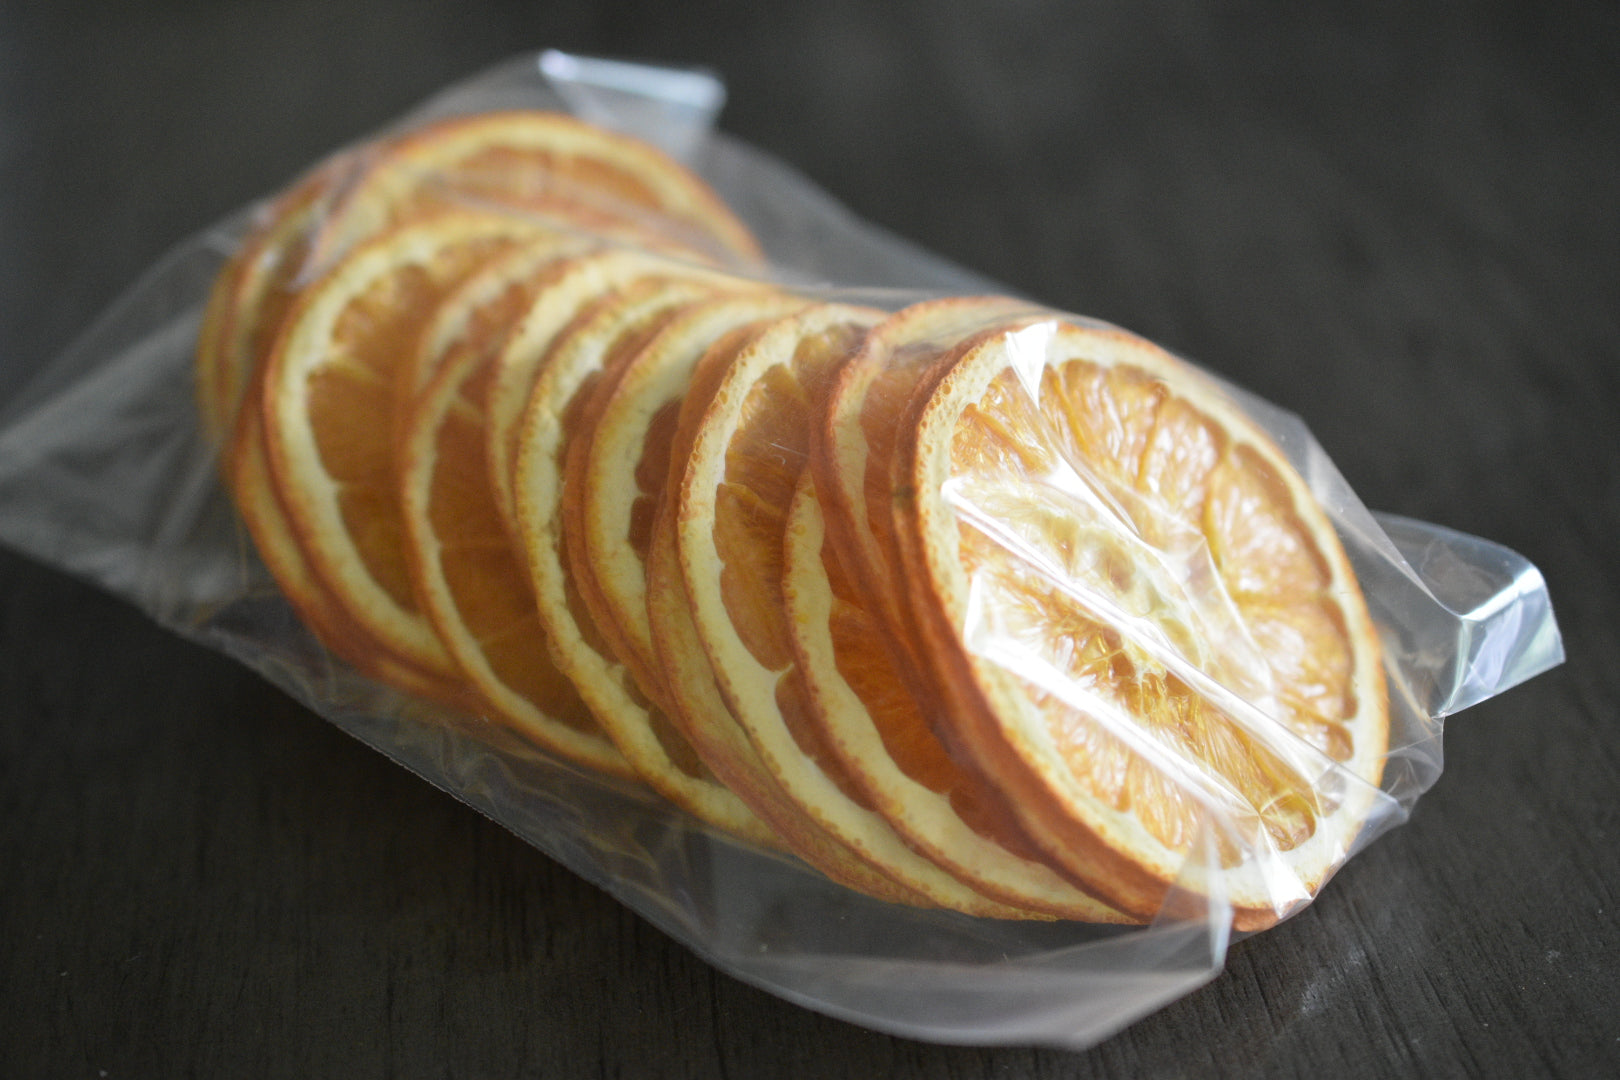 A plastic bag filled with dried orange slices rests on a wooden surface to show the packaged product. The orange slices are deep orange in color.